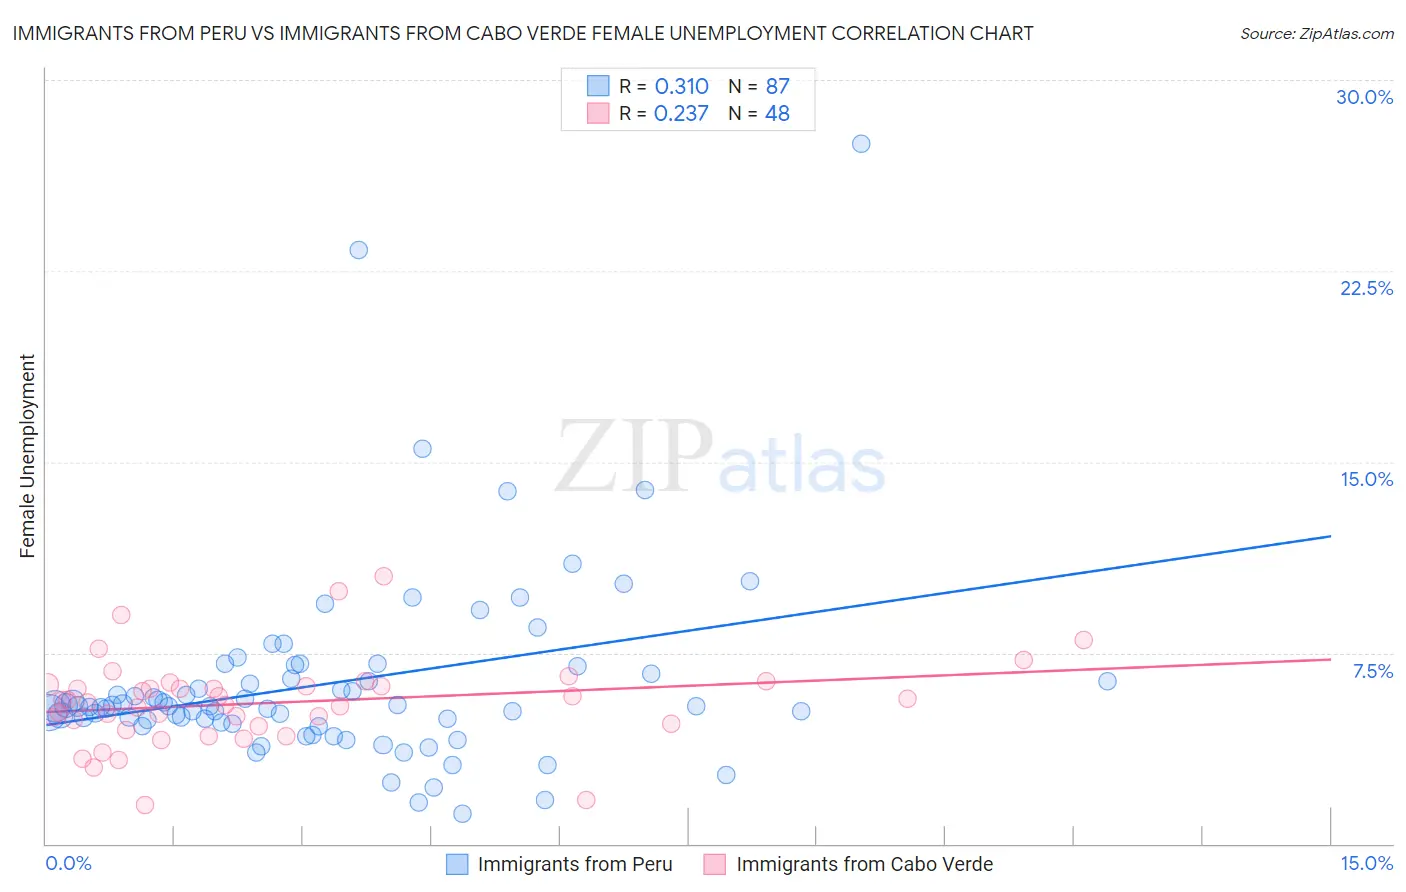 Immigrants from Peru vs Immigrants from Cabo Verde Female Unemployment